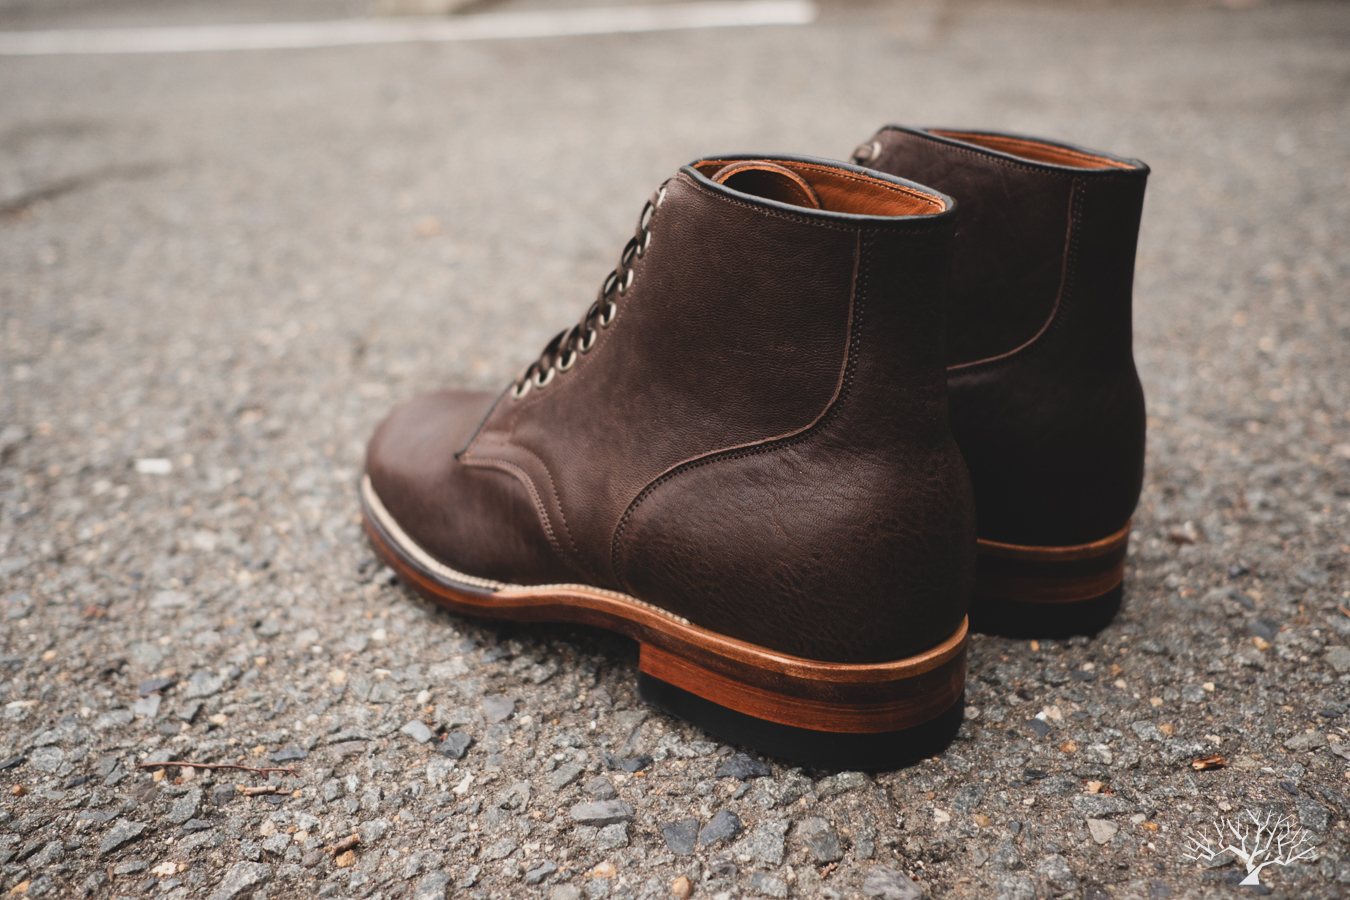 Viberg Horsehide Service Boot, Col 1071 Washed Horsehide Maryam